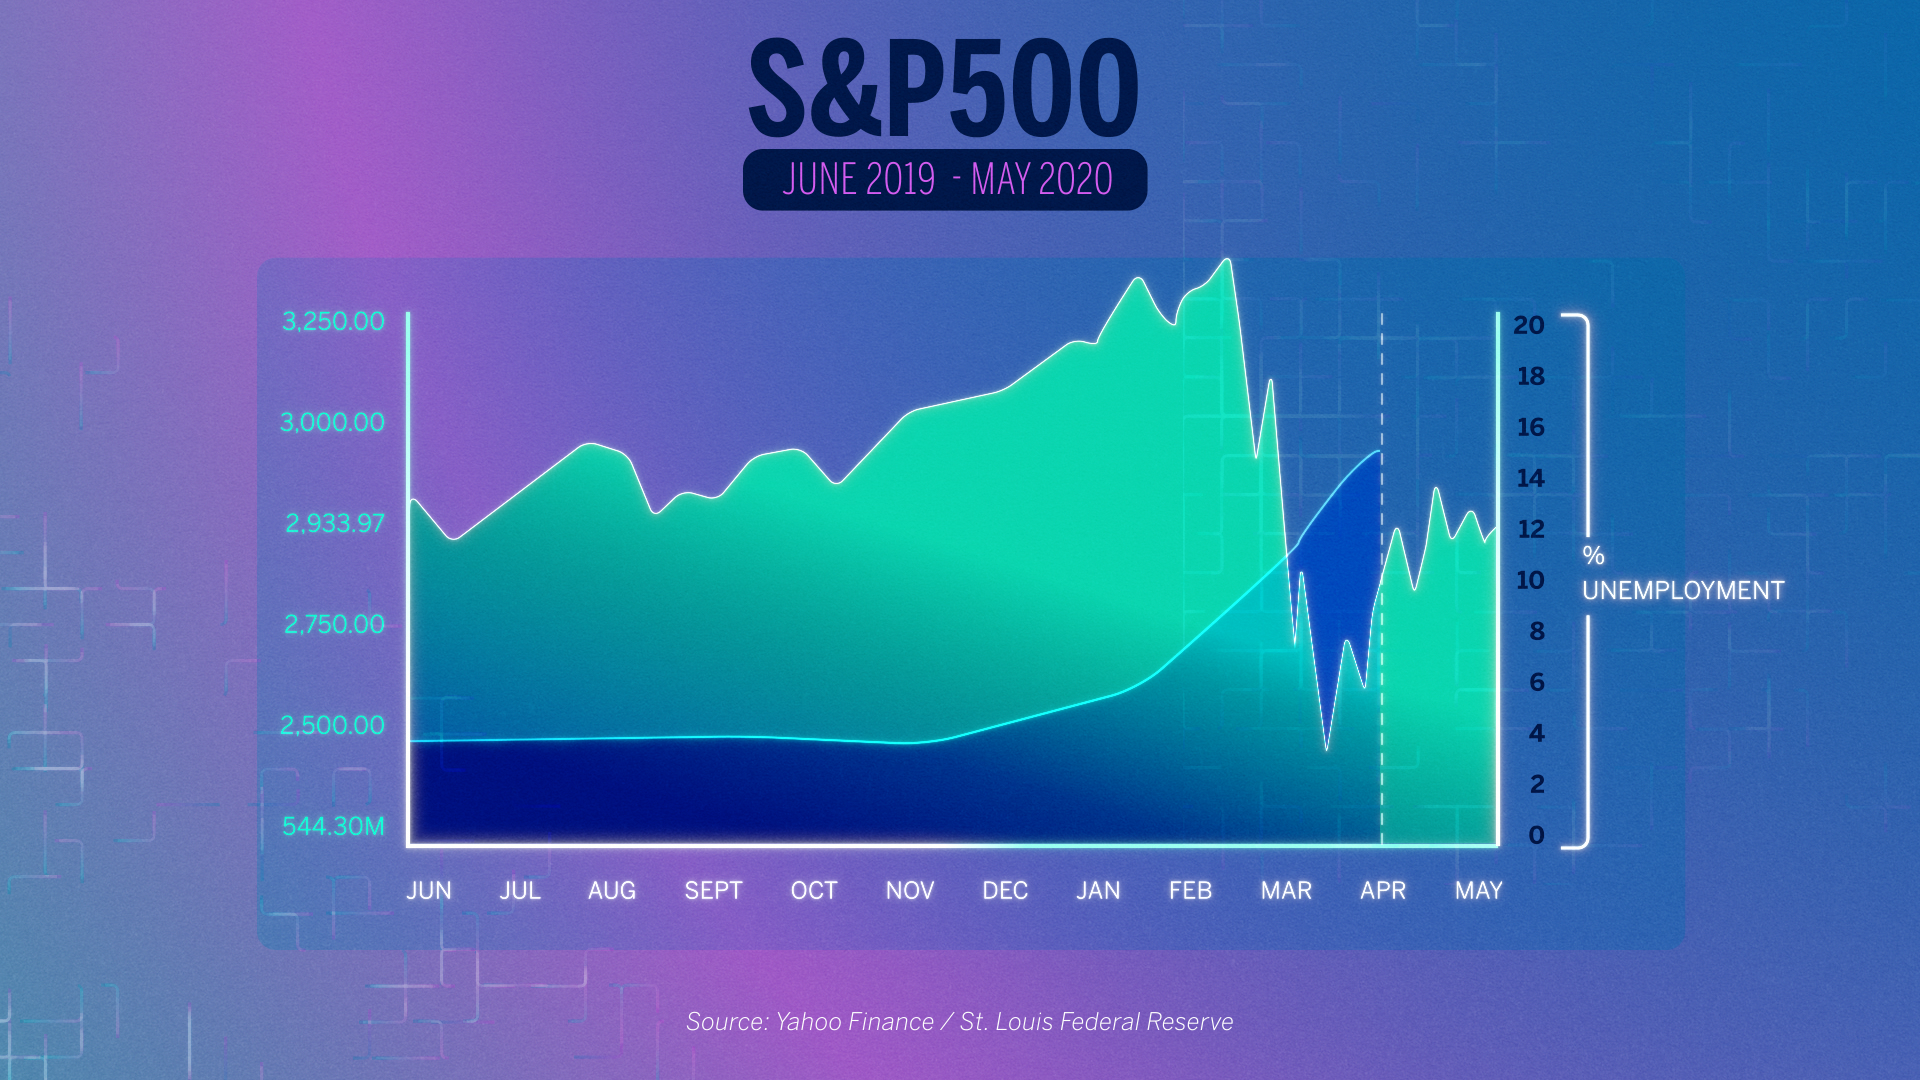 Why The Stock Market Is Up While The Economy Is Down